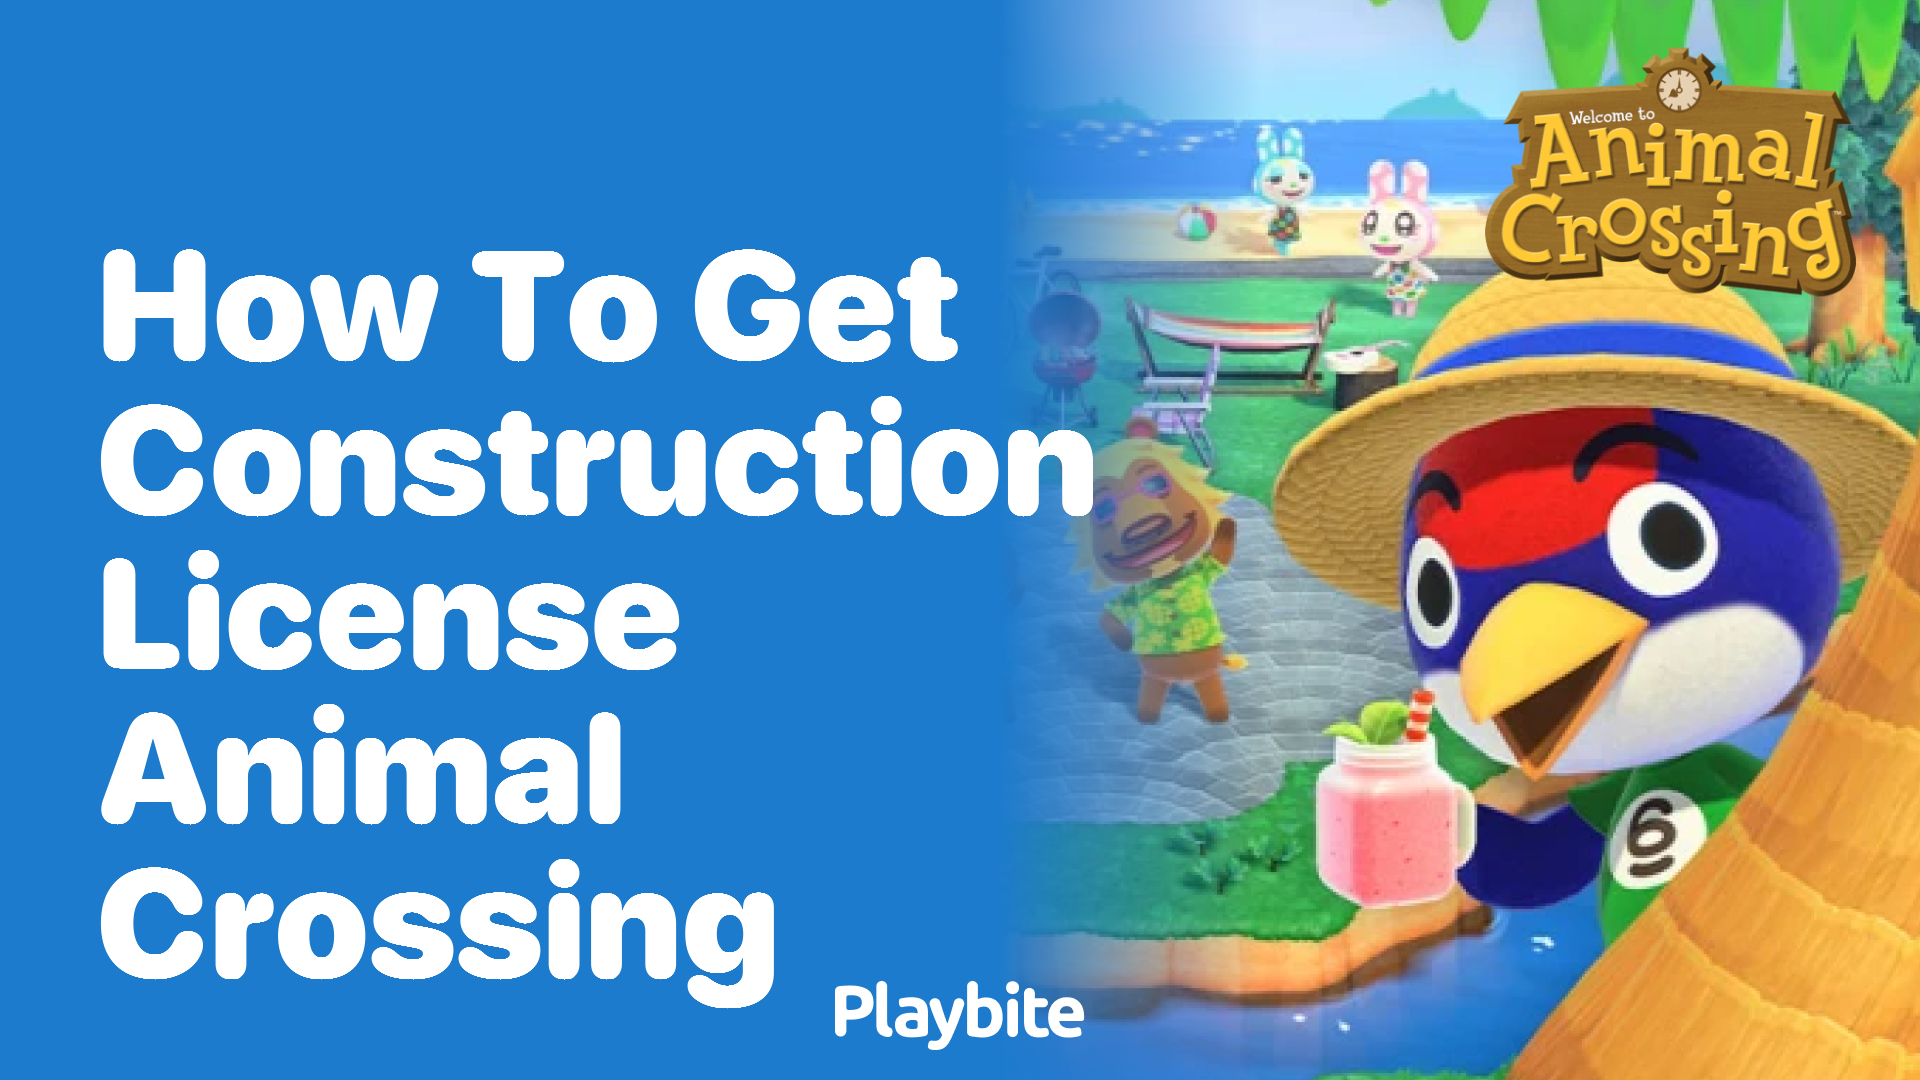 How to Get the Construction License in Animal Crossing